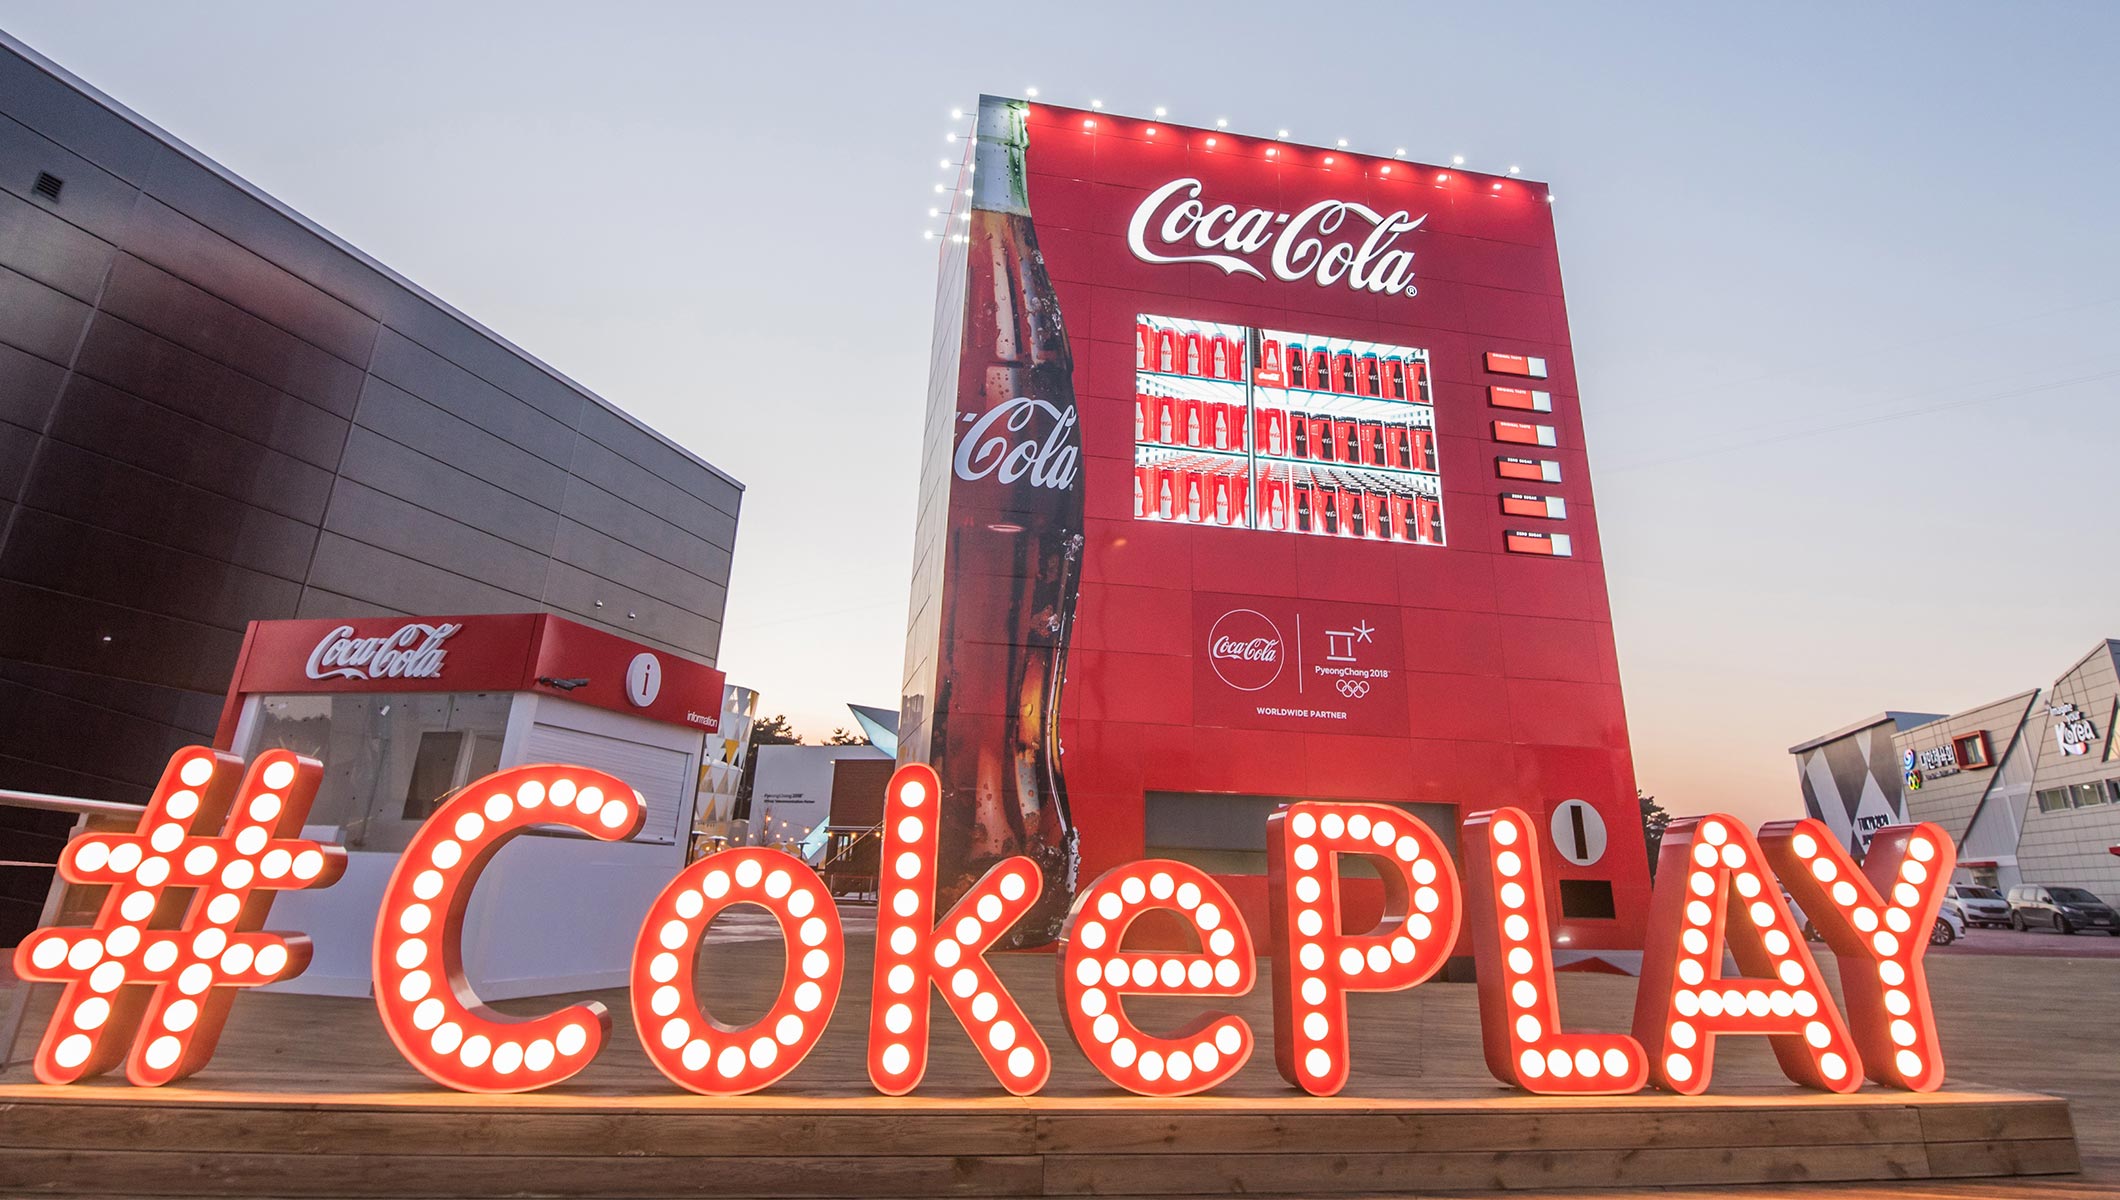 CocaCola and the Olympic Games celebrate 90 years of partnership